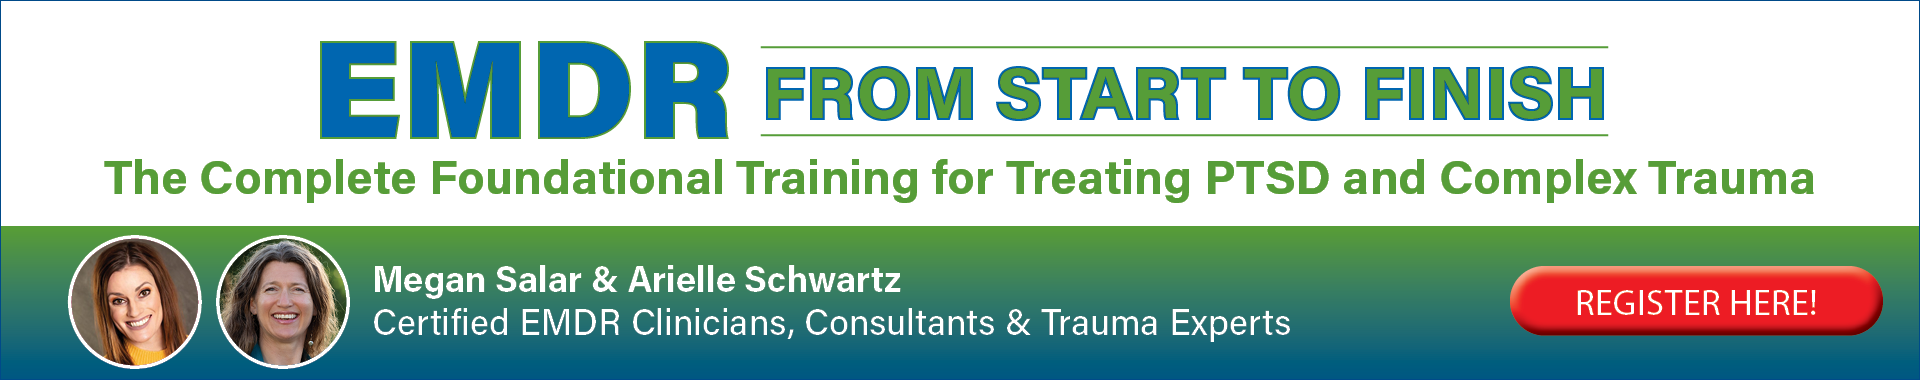 EMDR from Start to Finish: The Complete Foundational Training for Treating PTSD and Complex Trauma